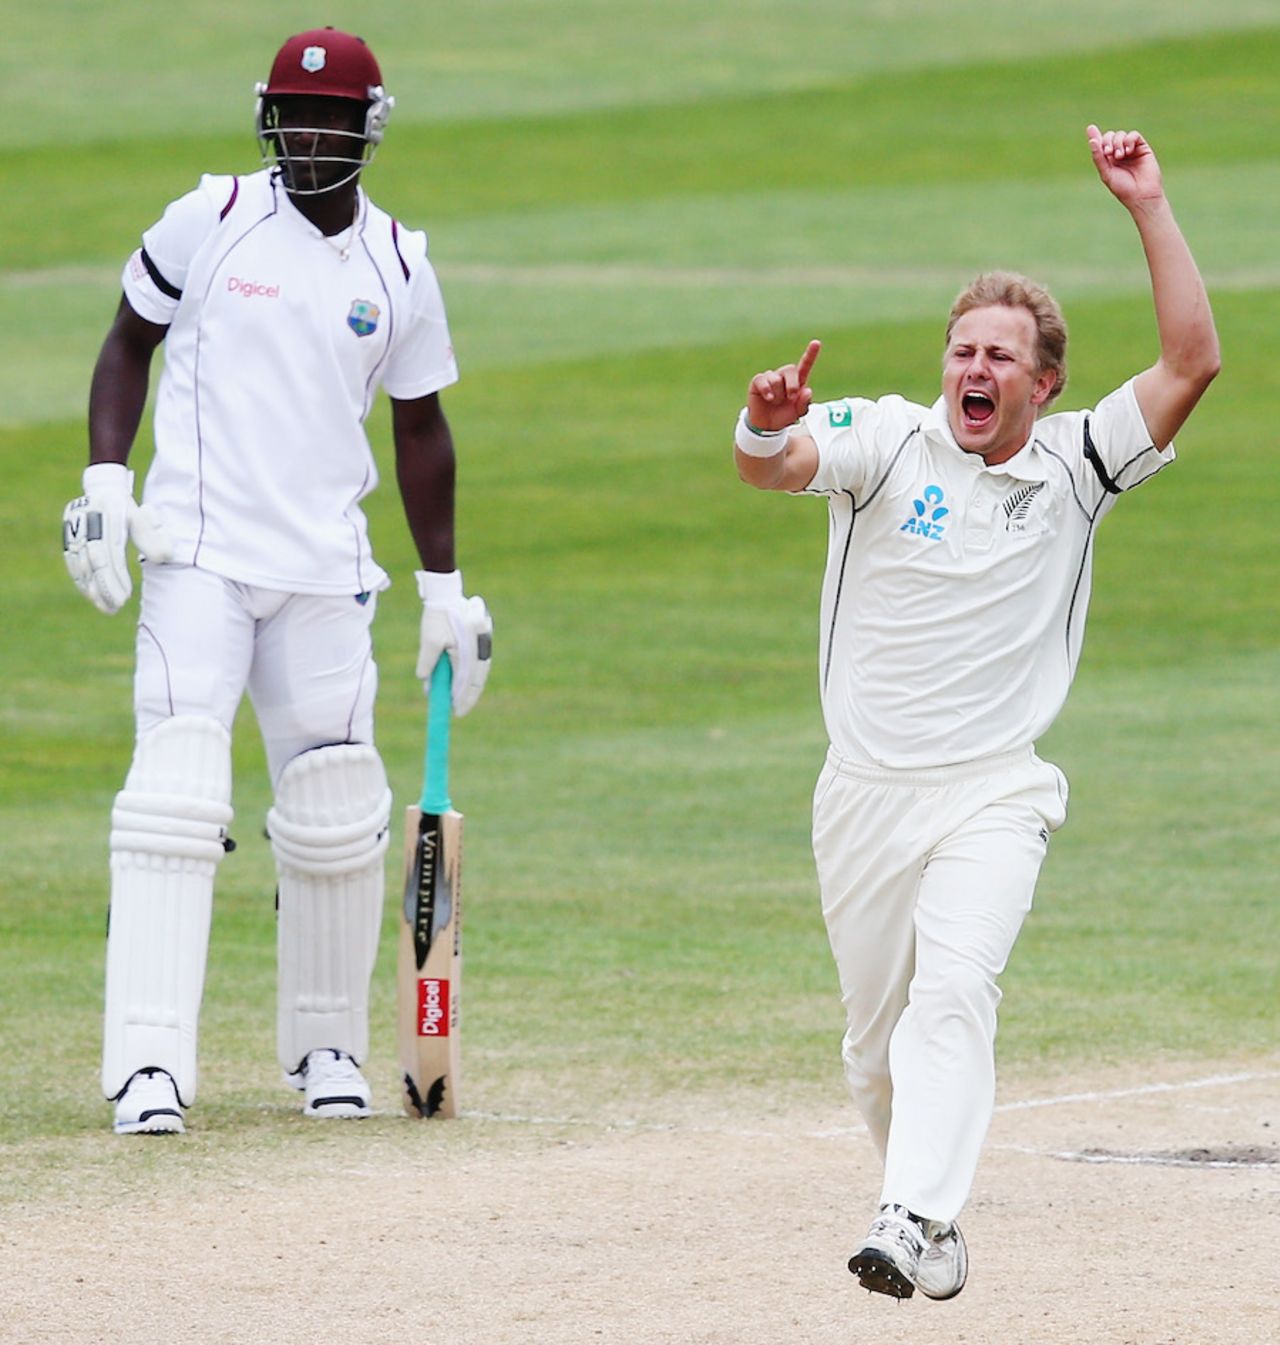 Neil Wagner celebrates the wicket of Shane Shillingford, New Zealand v West Indies, 1st Test, Dunedin, 5th day, December 7, 2013